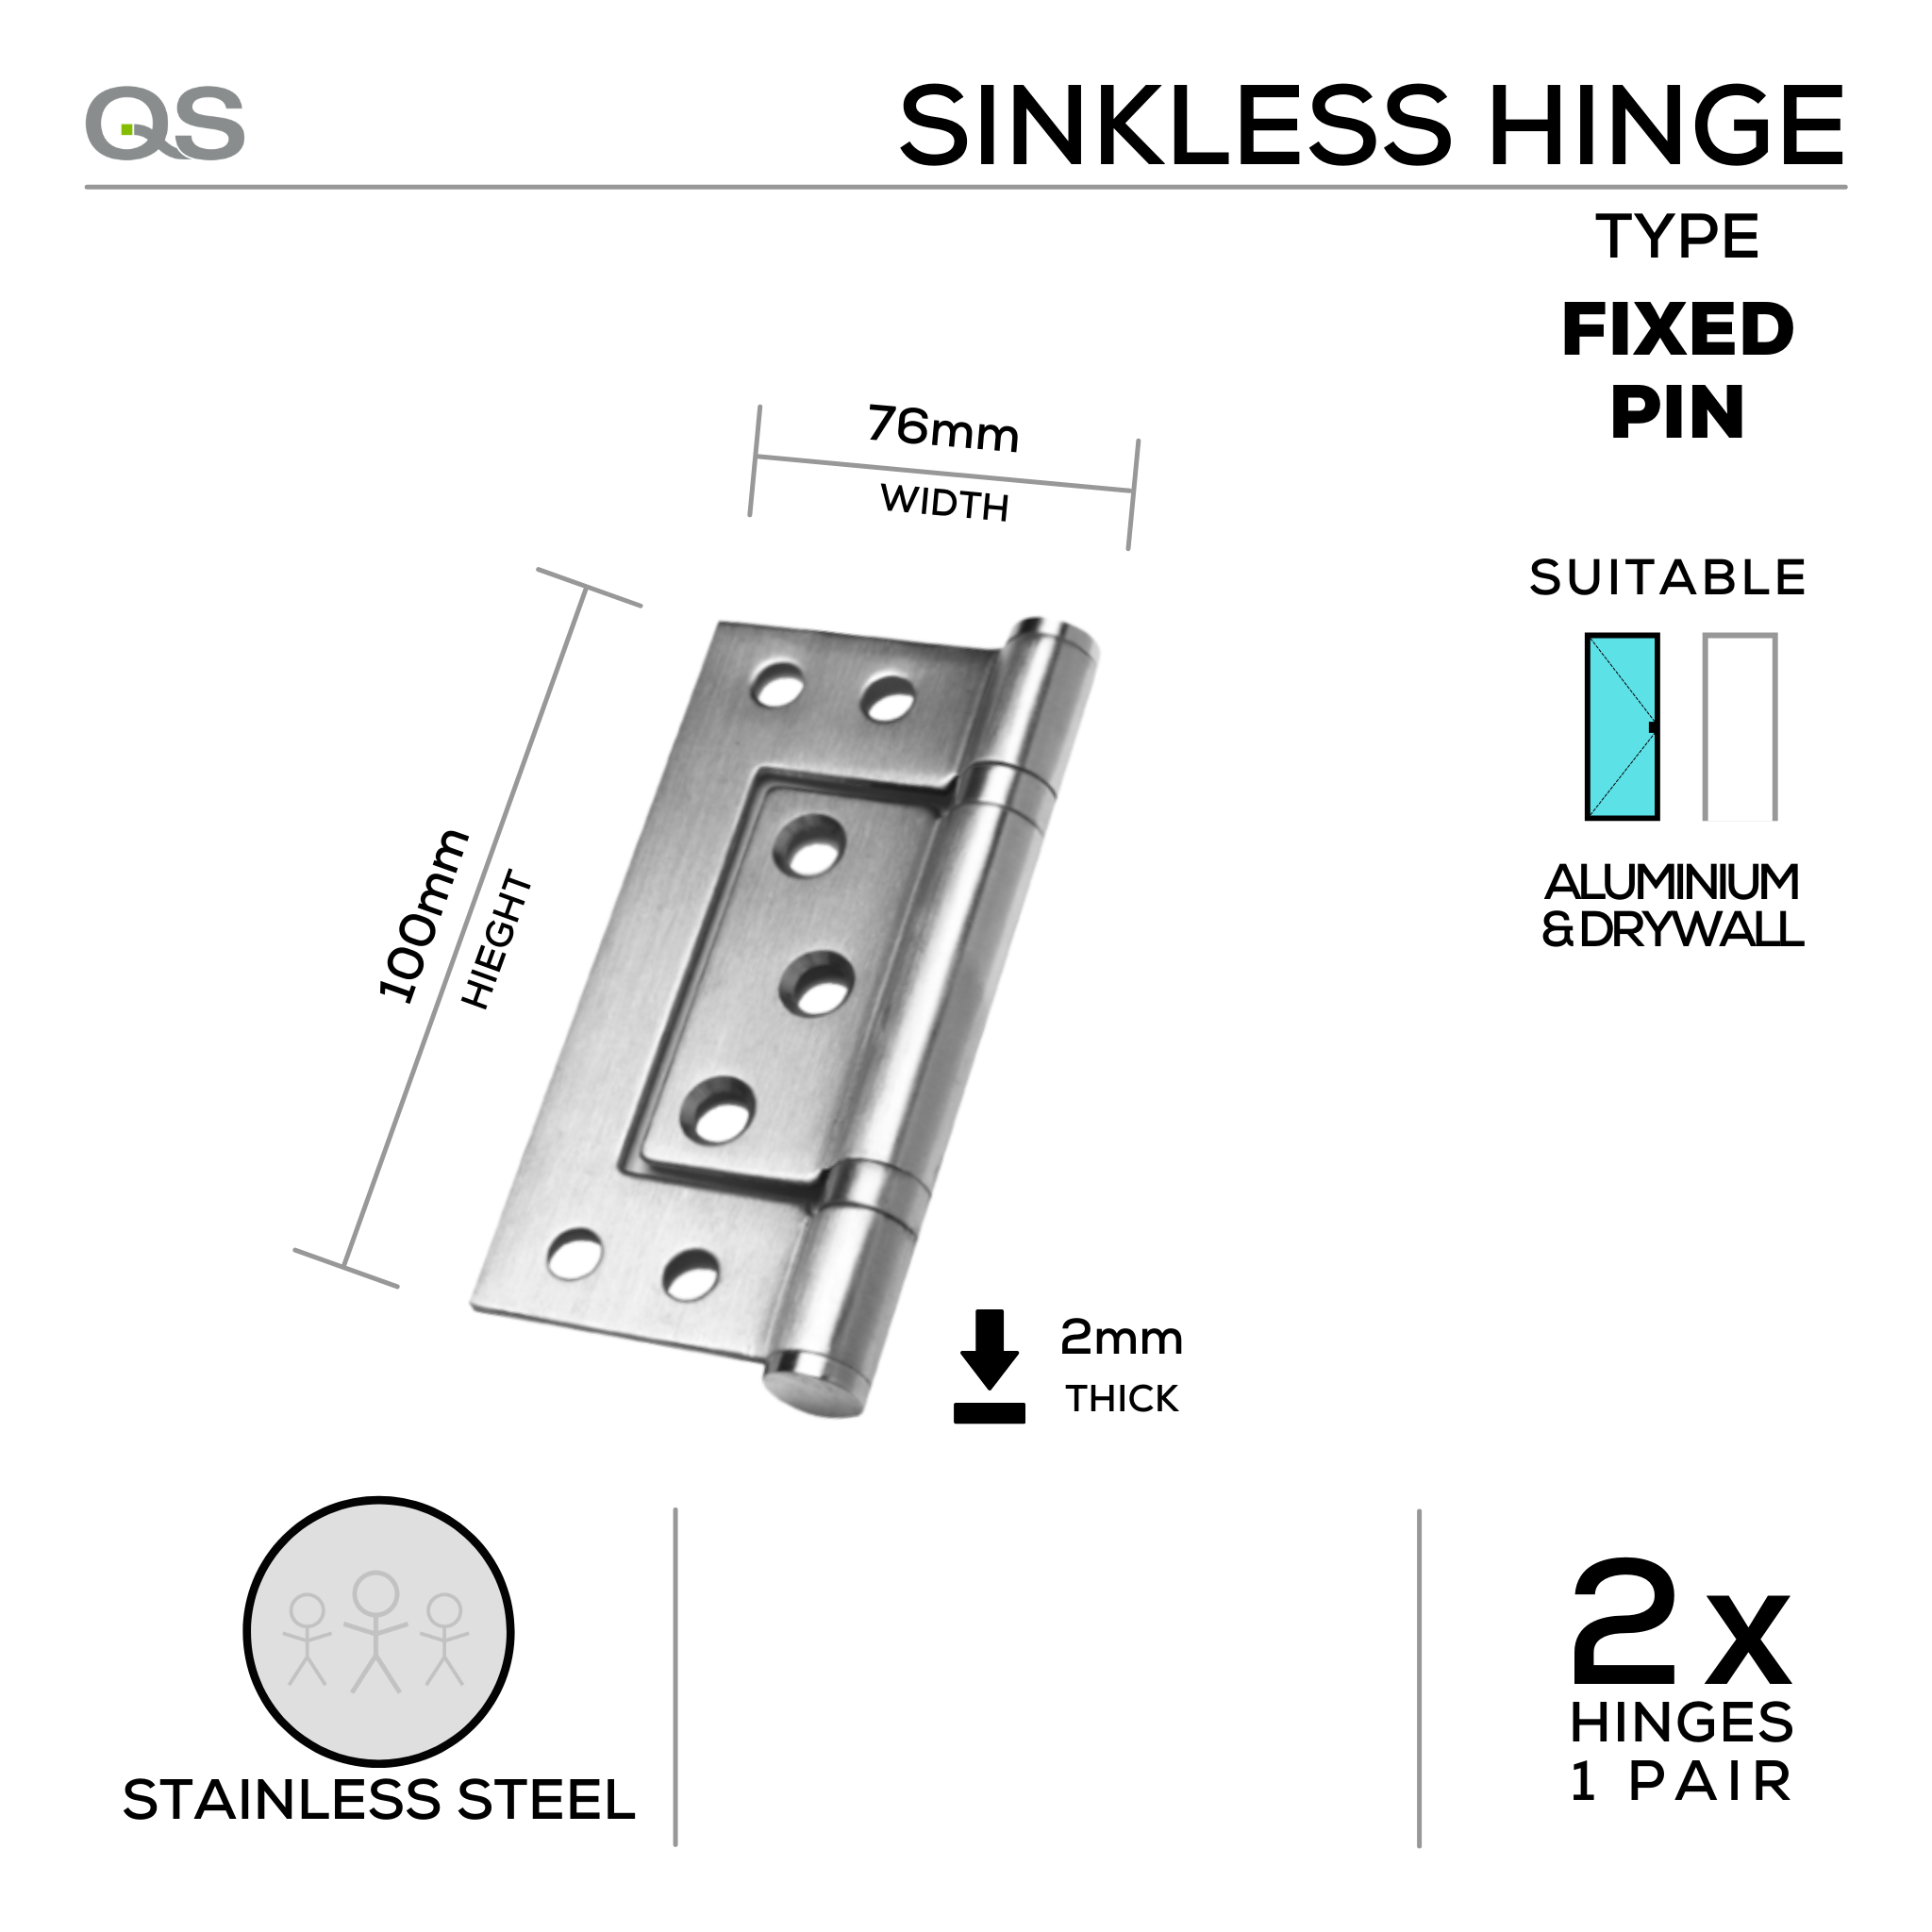 QS4441, Sinkless Hinge, Left Hand, 2 x Hinges (1 Pair), 100mm (h) x 76mm (w) x 2mm (t), Stainless Steel, QS